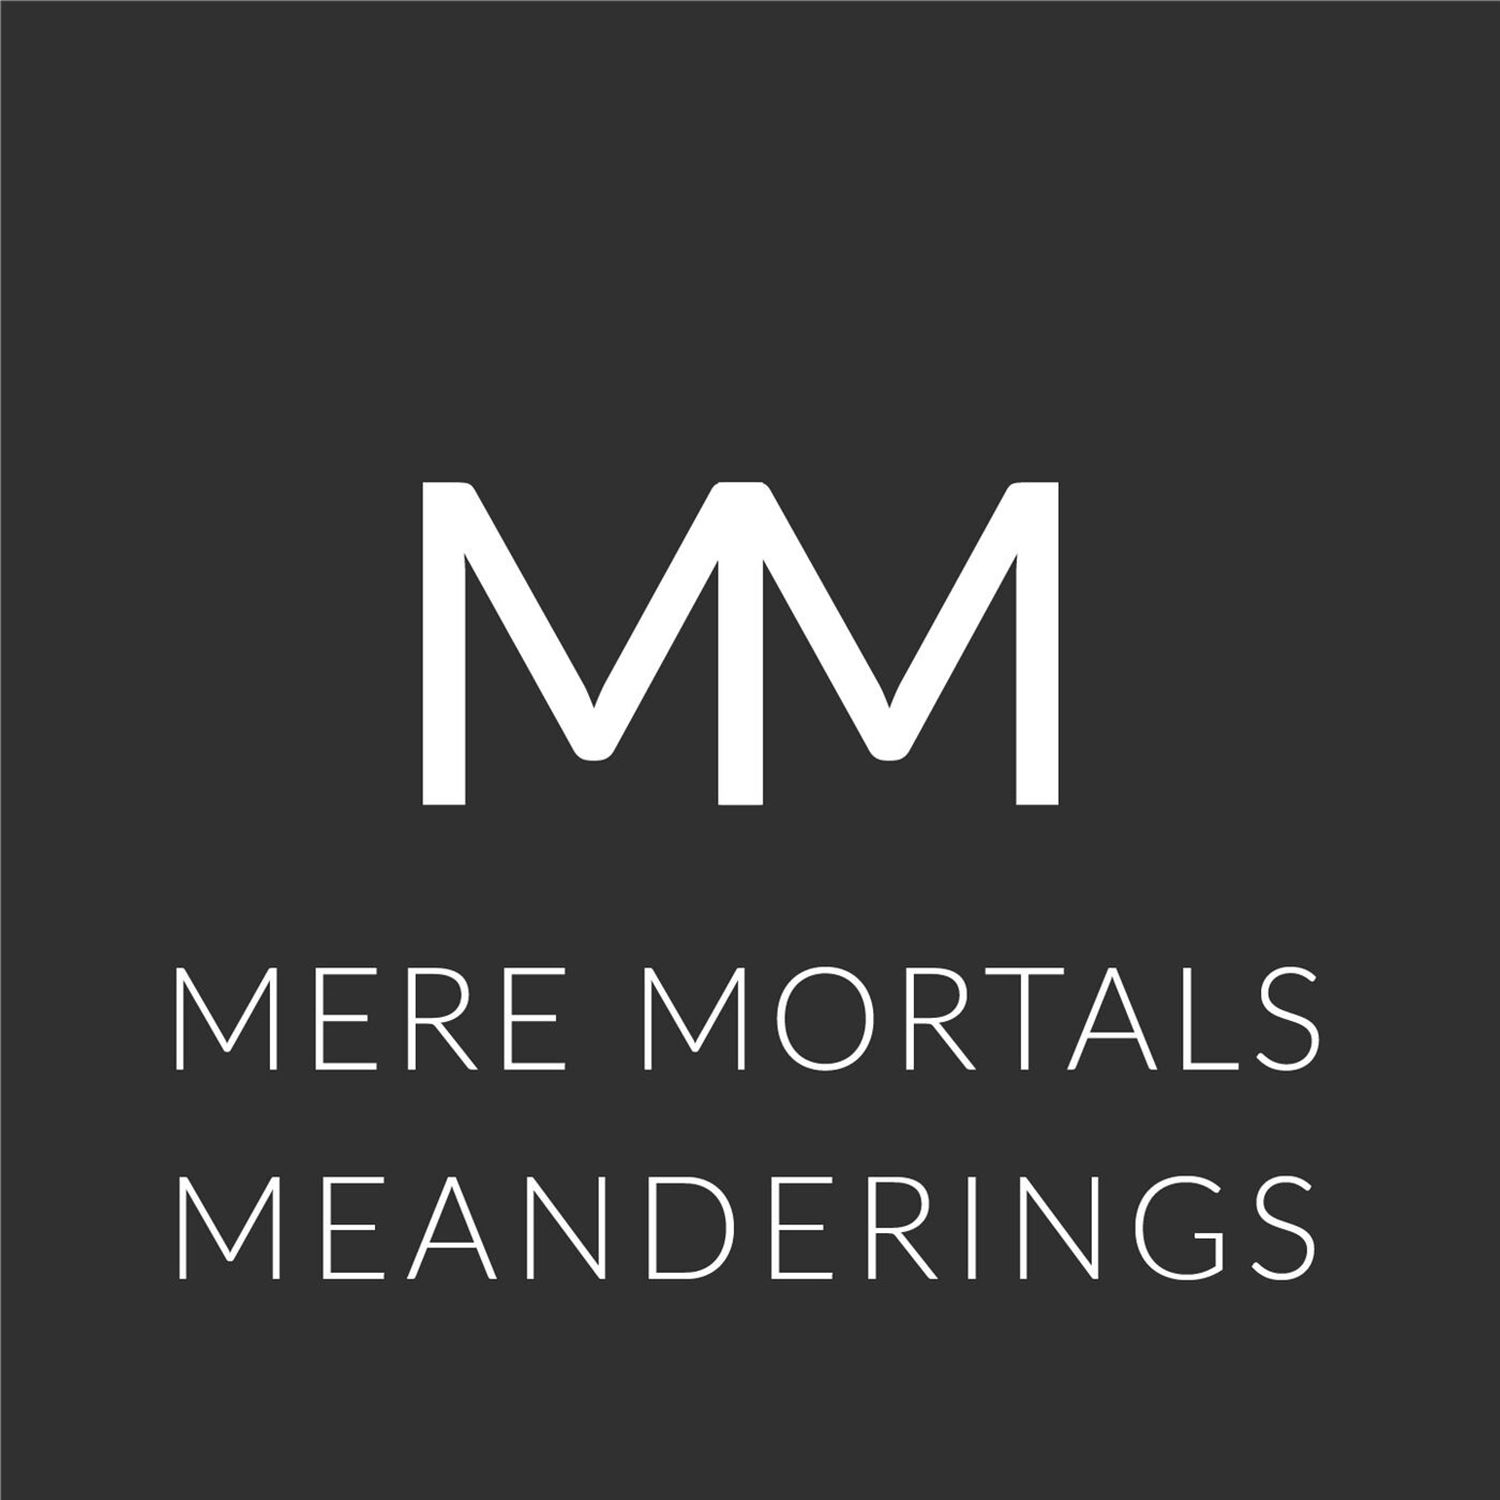 Will Amazon Be Around In 40 Years? (Mere Mortals Episode #64 - Meanderings)